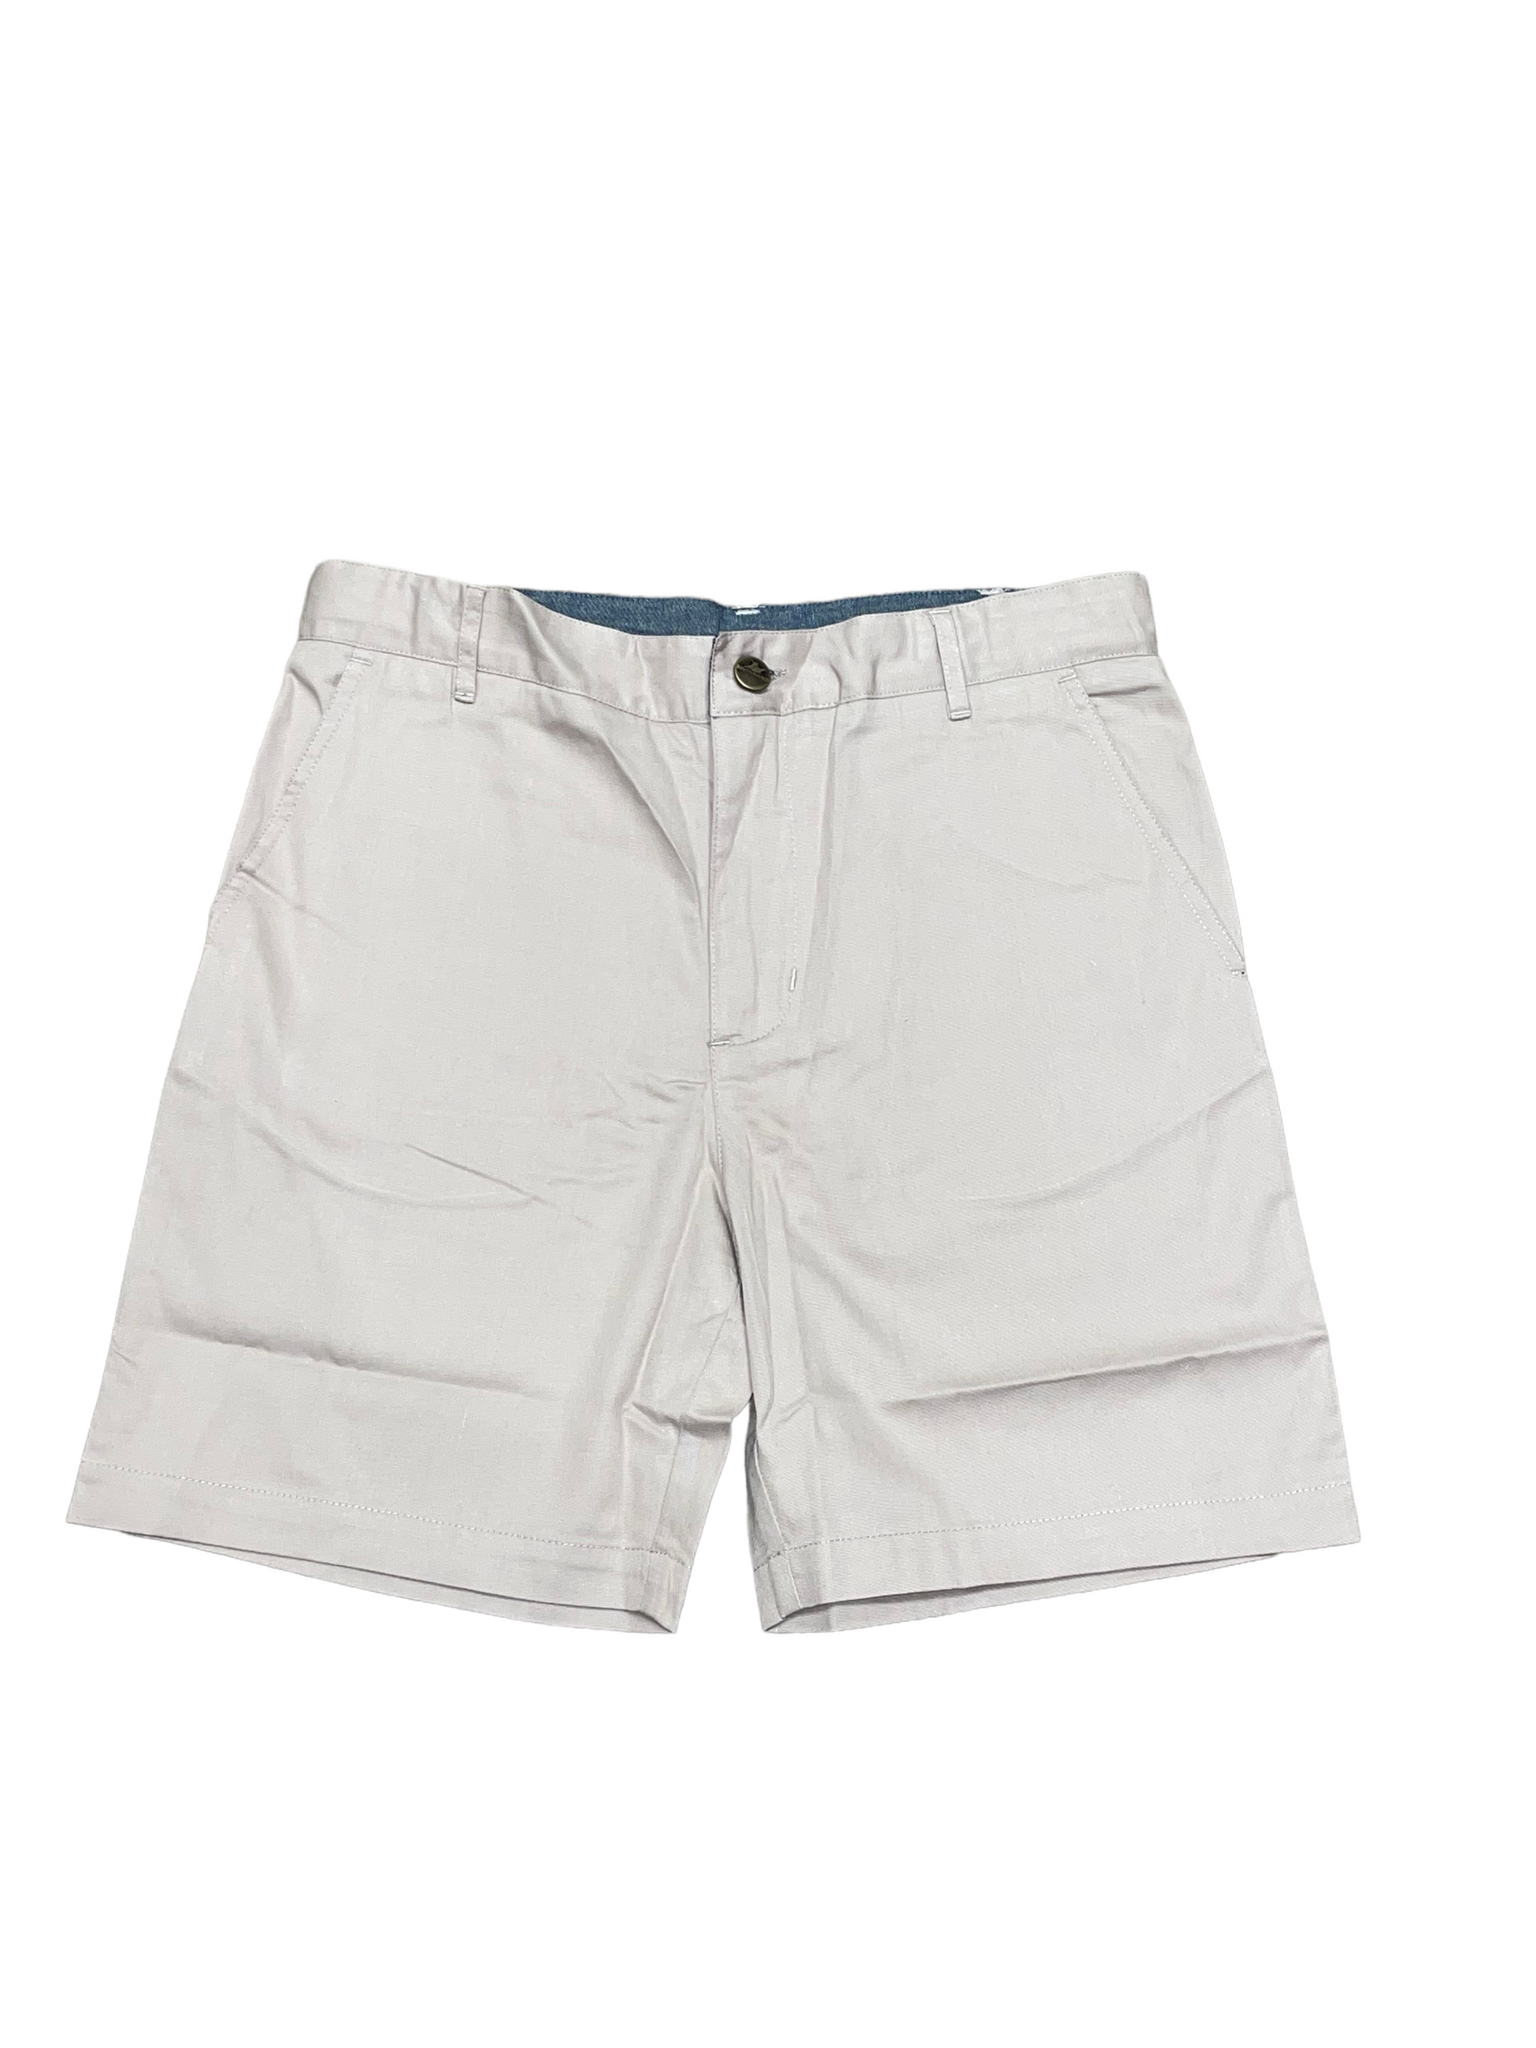 Southbound Shorts- Silver